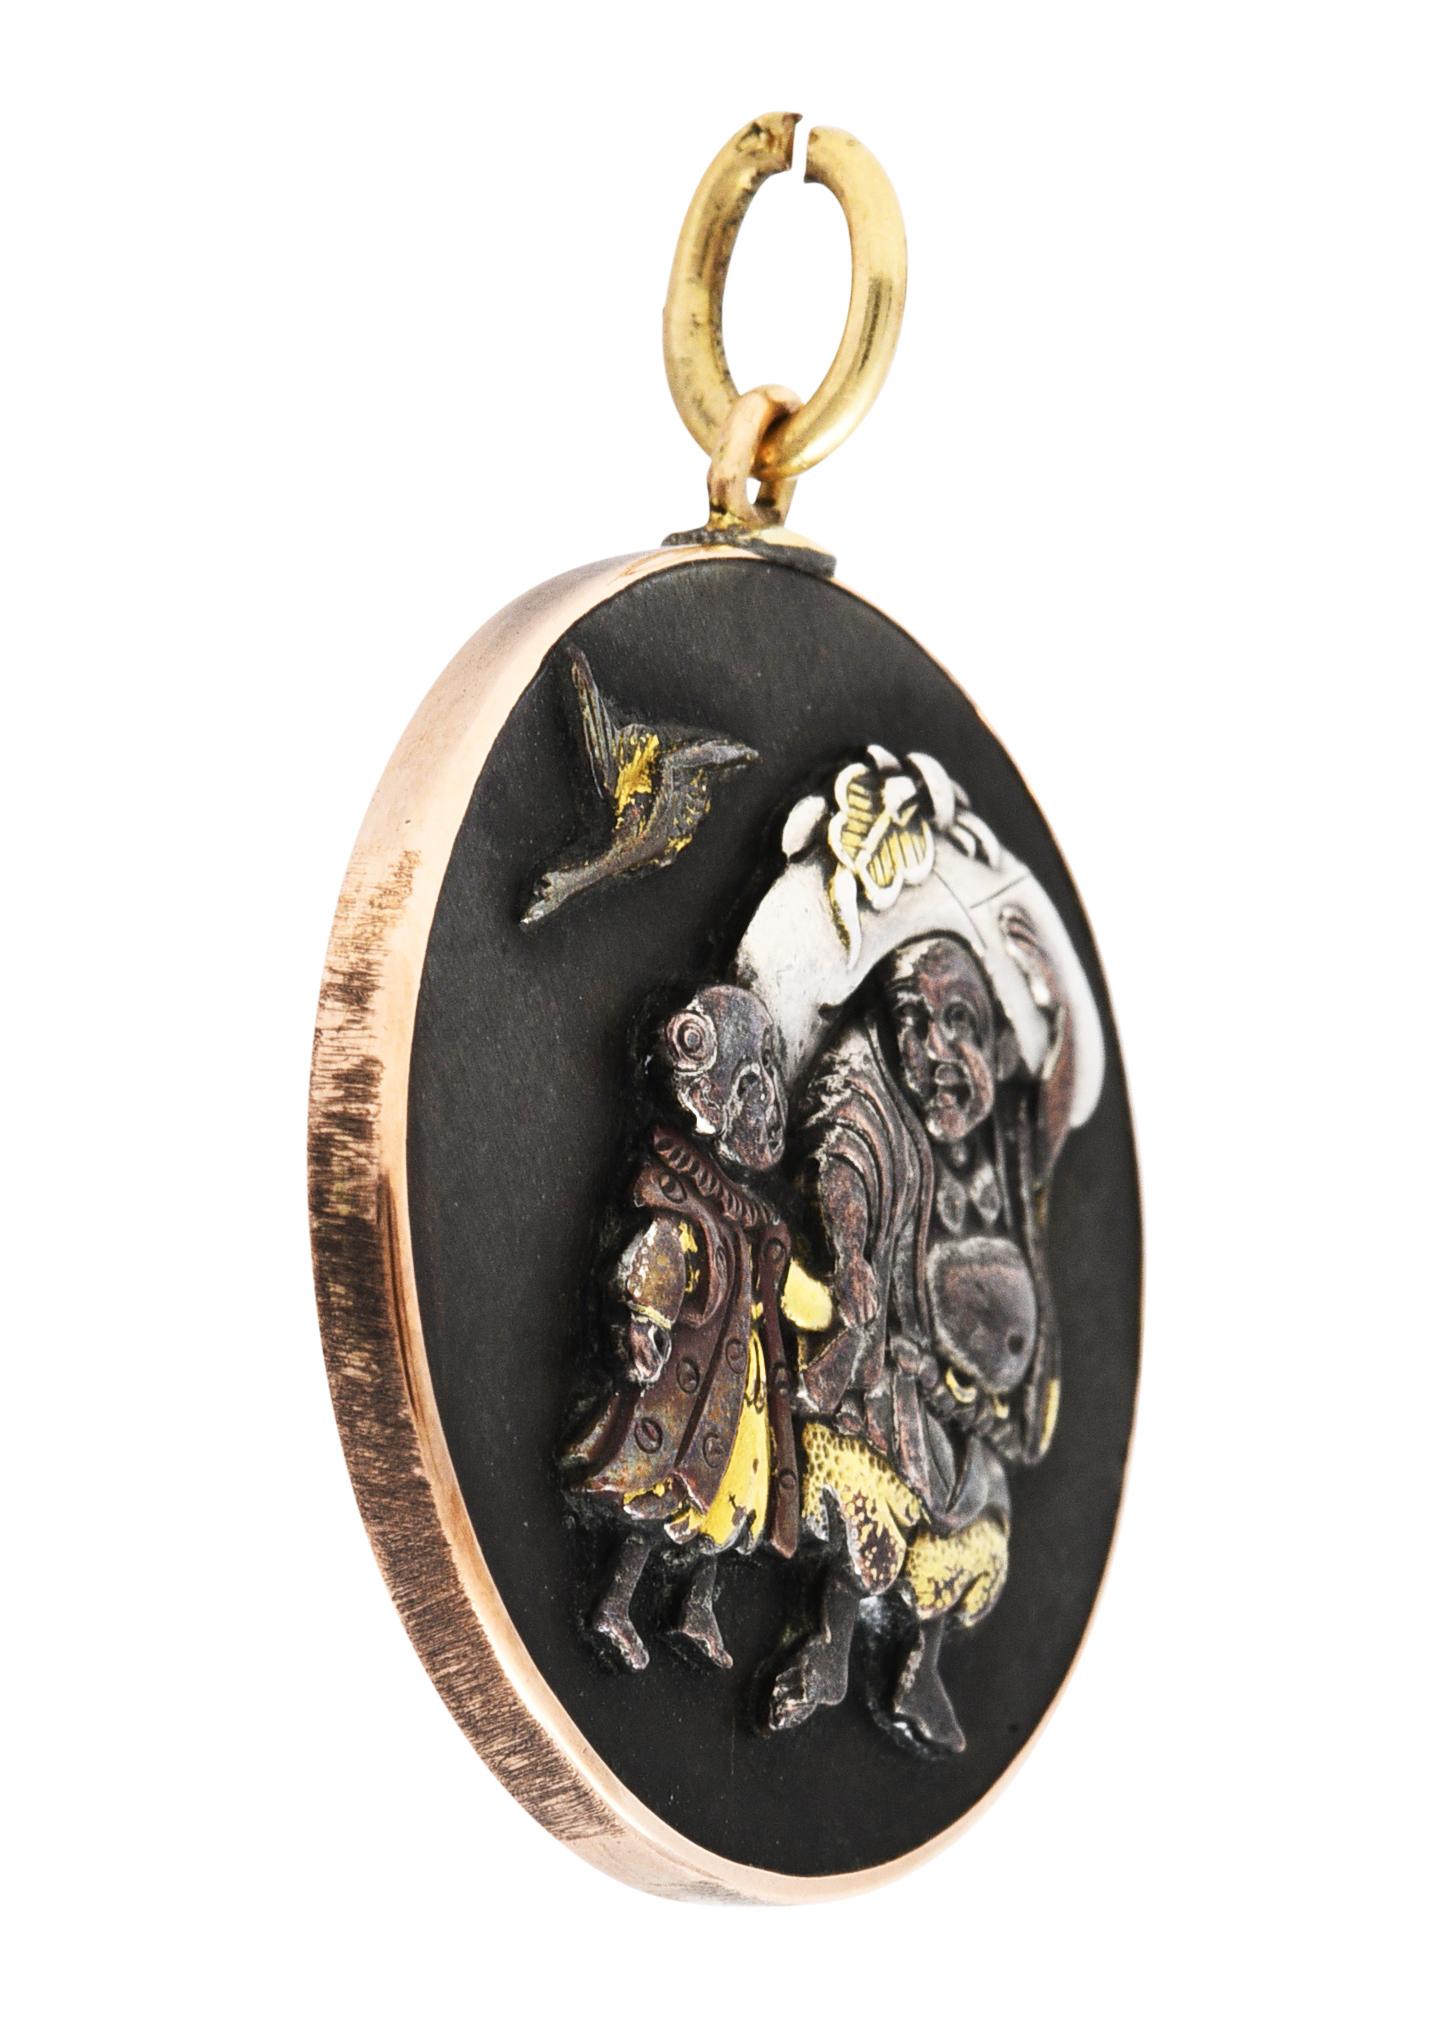 Circular pendant features a round shakudō billon

Heavily oxidized with gold and silver appliqué

Depicting a jovial man and his daughter carrying luggage with a bird soaring overhead

Bezel set in a gold surround and backed by silver

Tested as 14